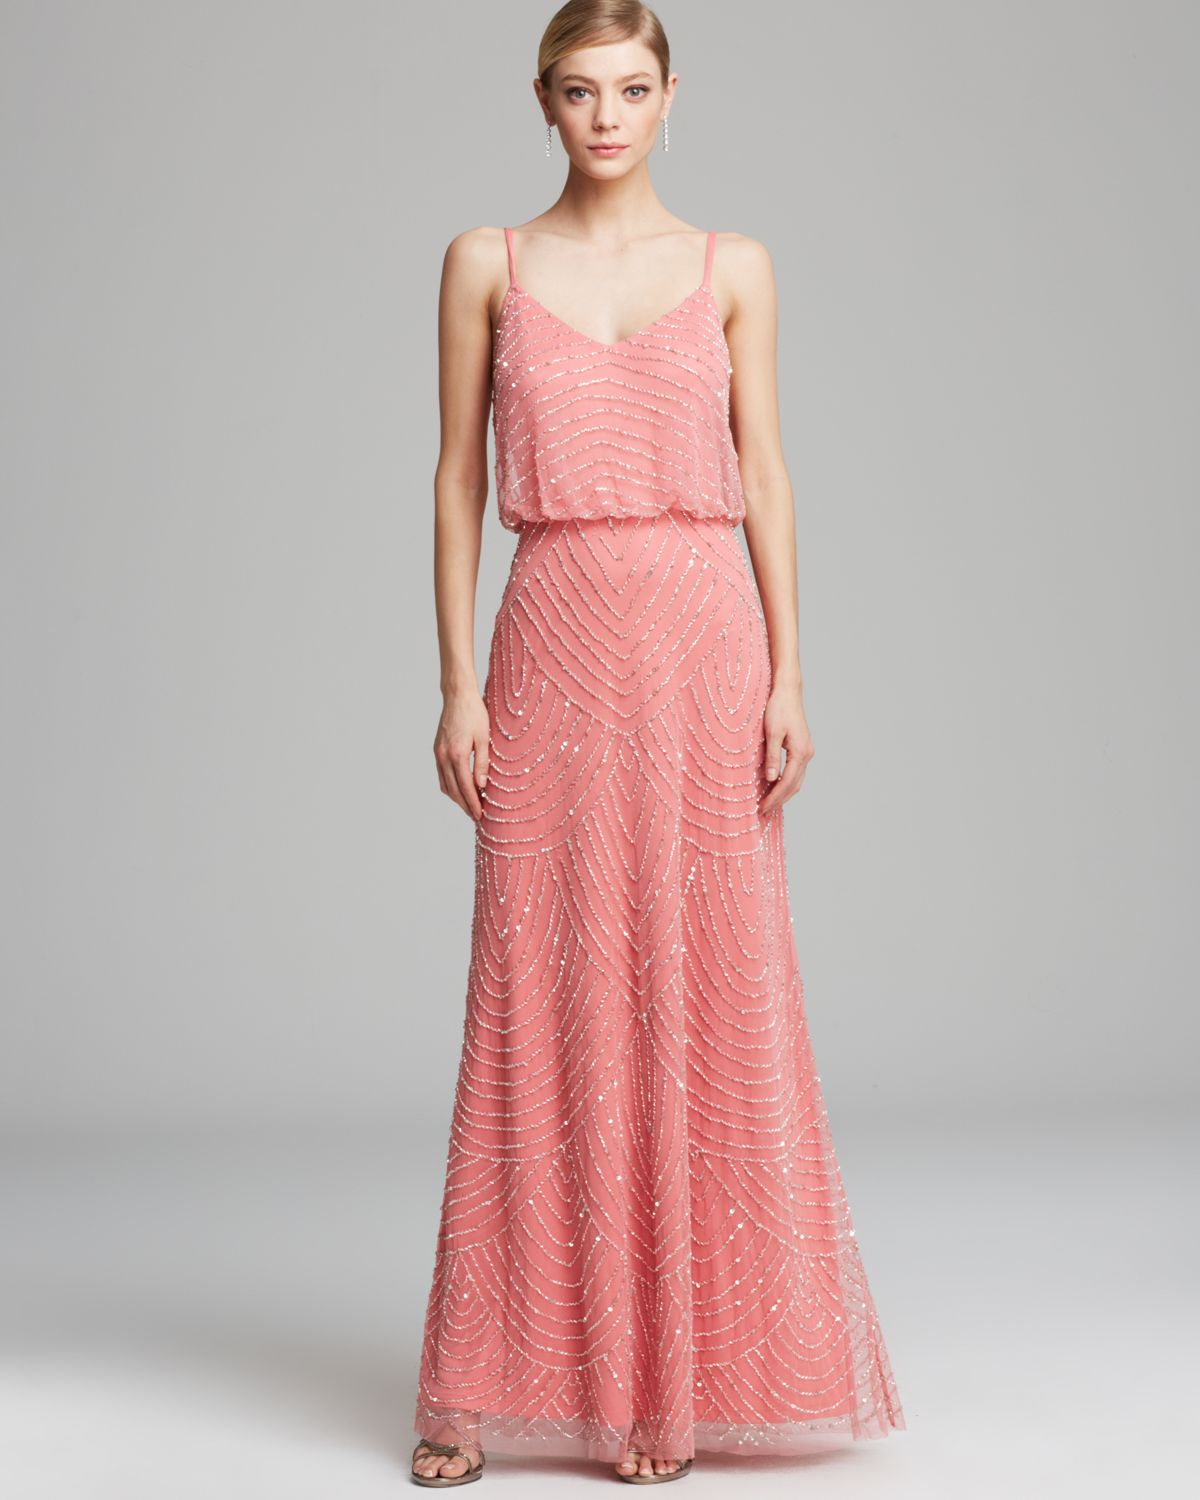 Lyst - Adrianna Papell Gown Beaded Blouson in Pink